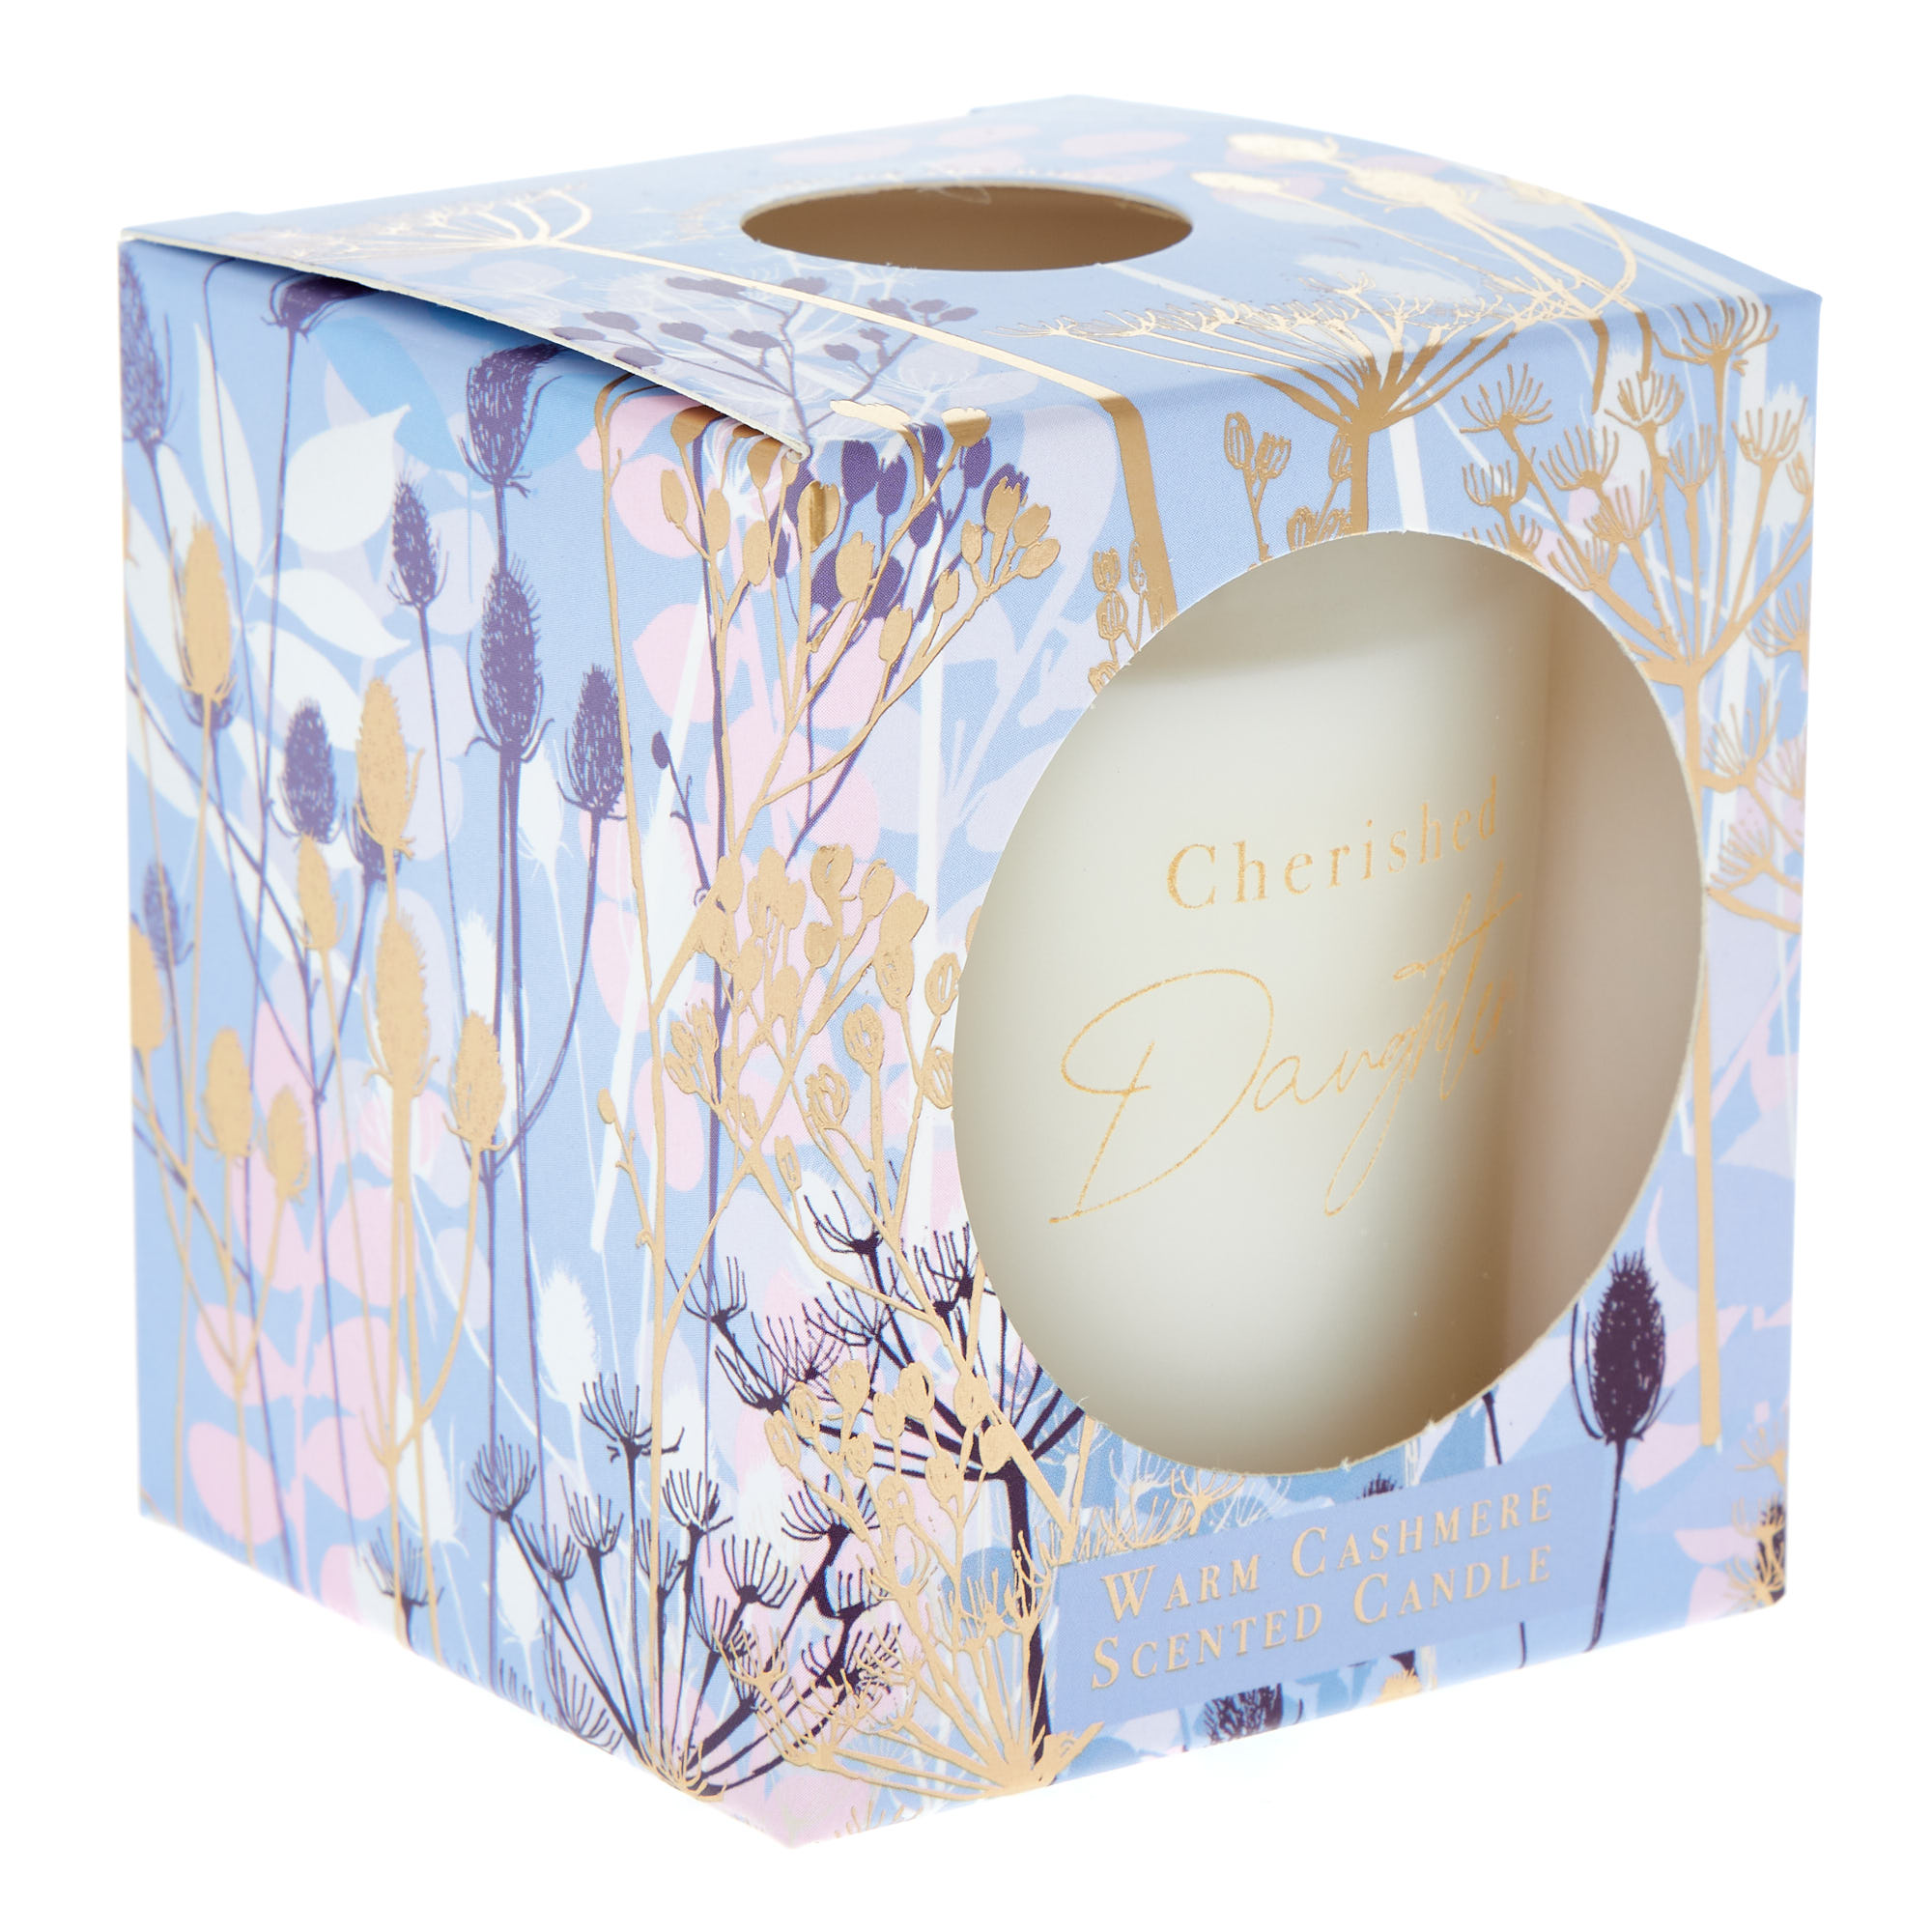 Cherished Daughter Warm Cashmere Scented Candle